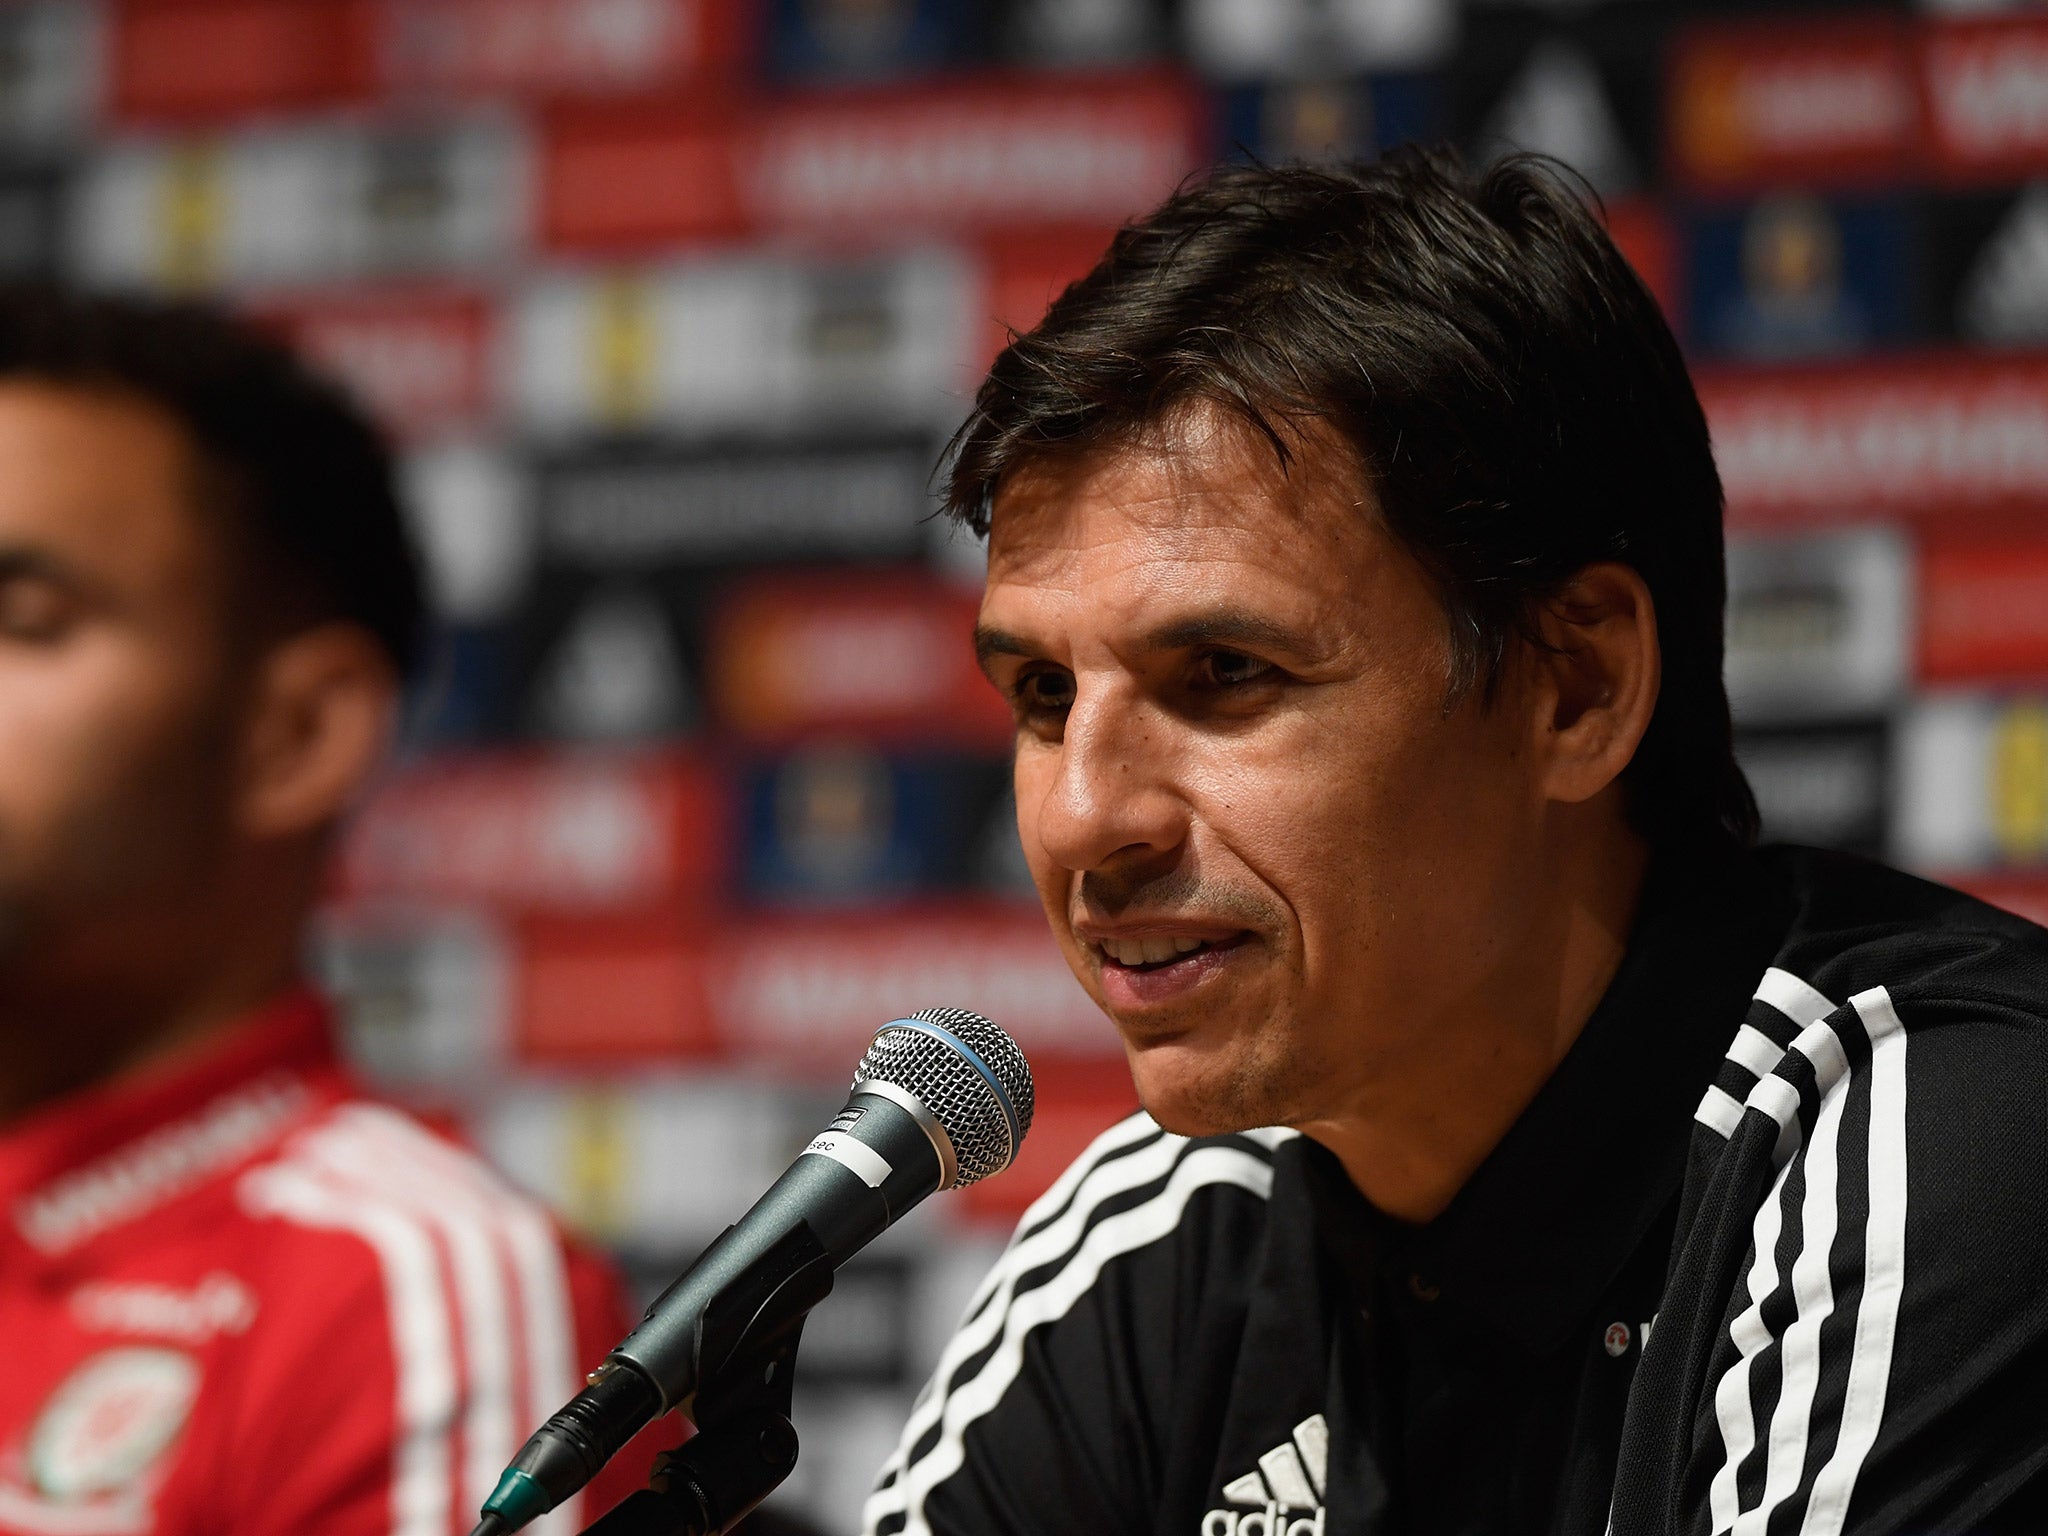 Chris Coleman says he will never manage England if the opportunity presented itself